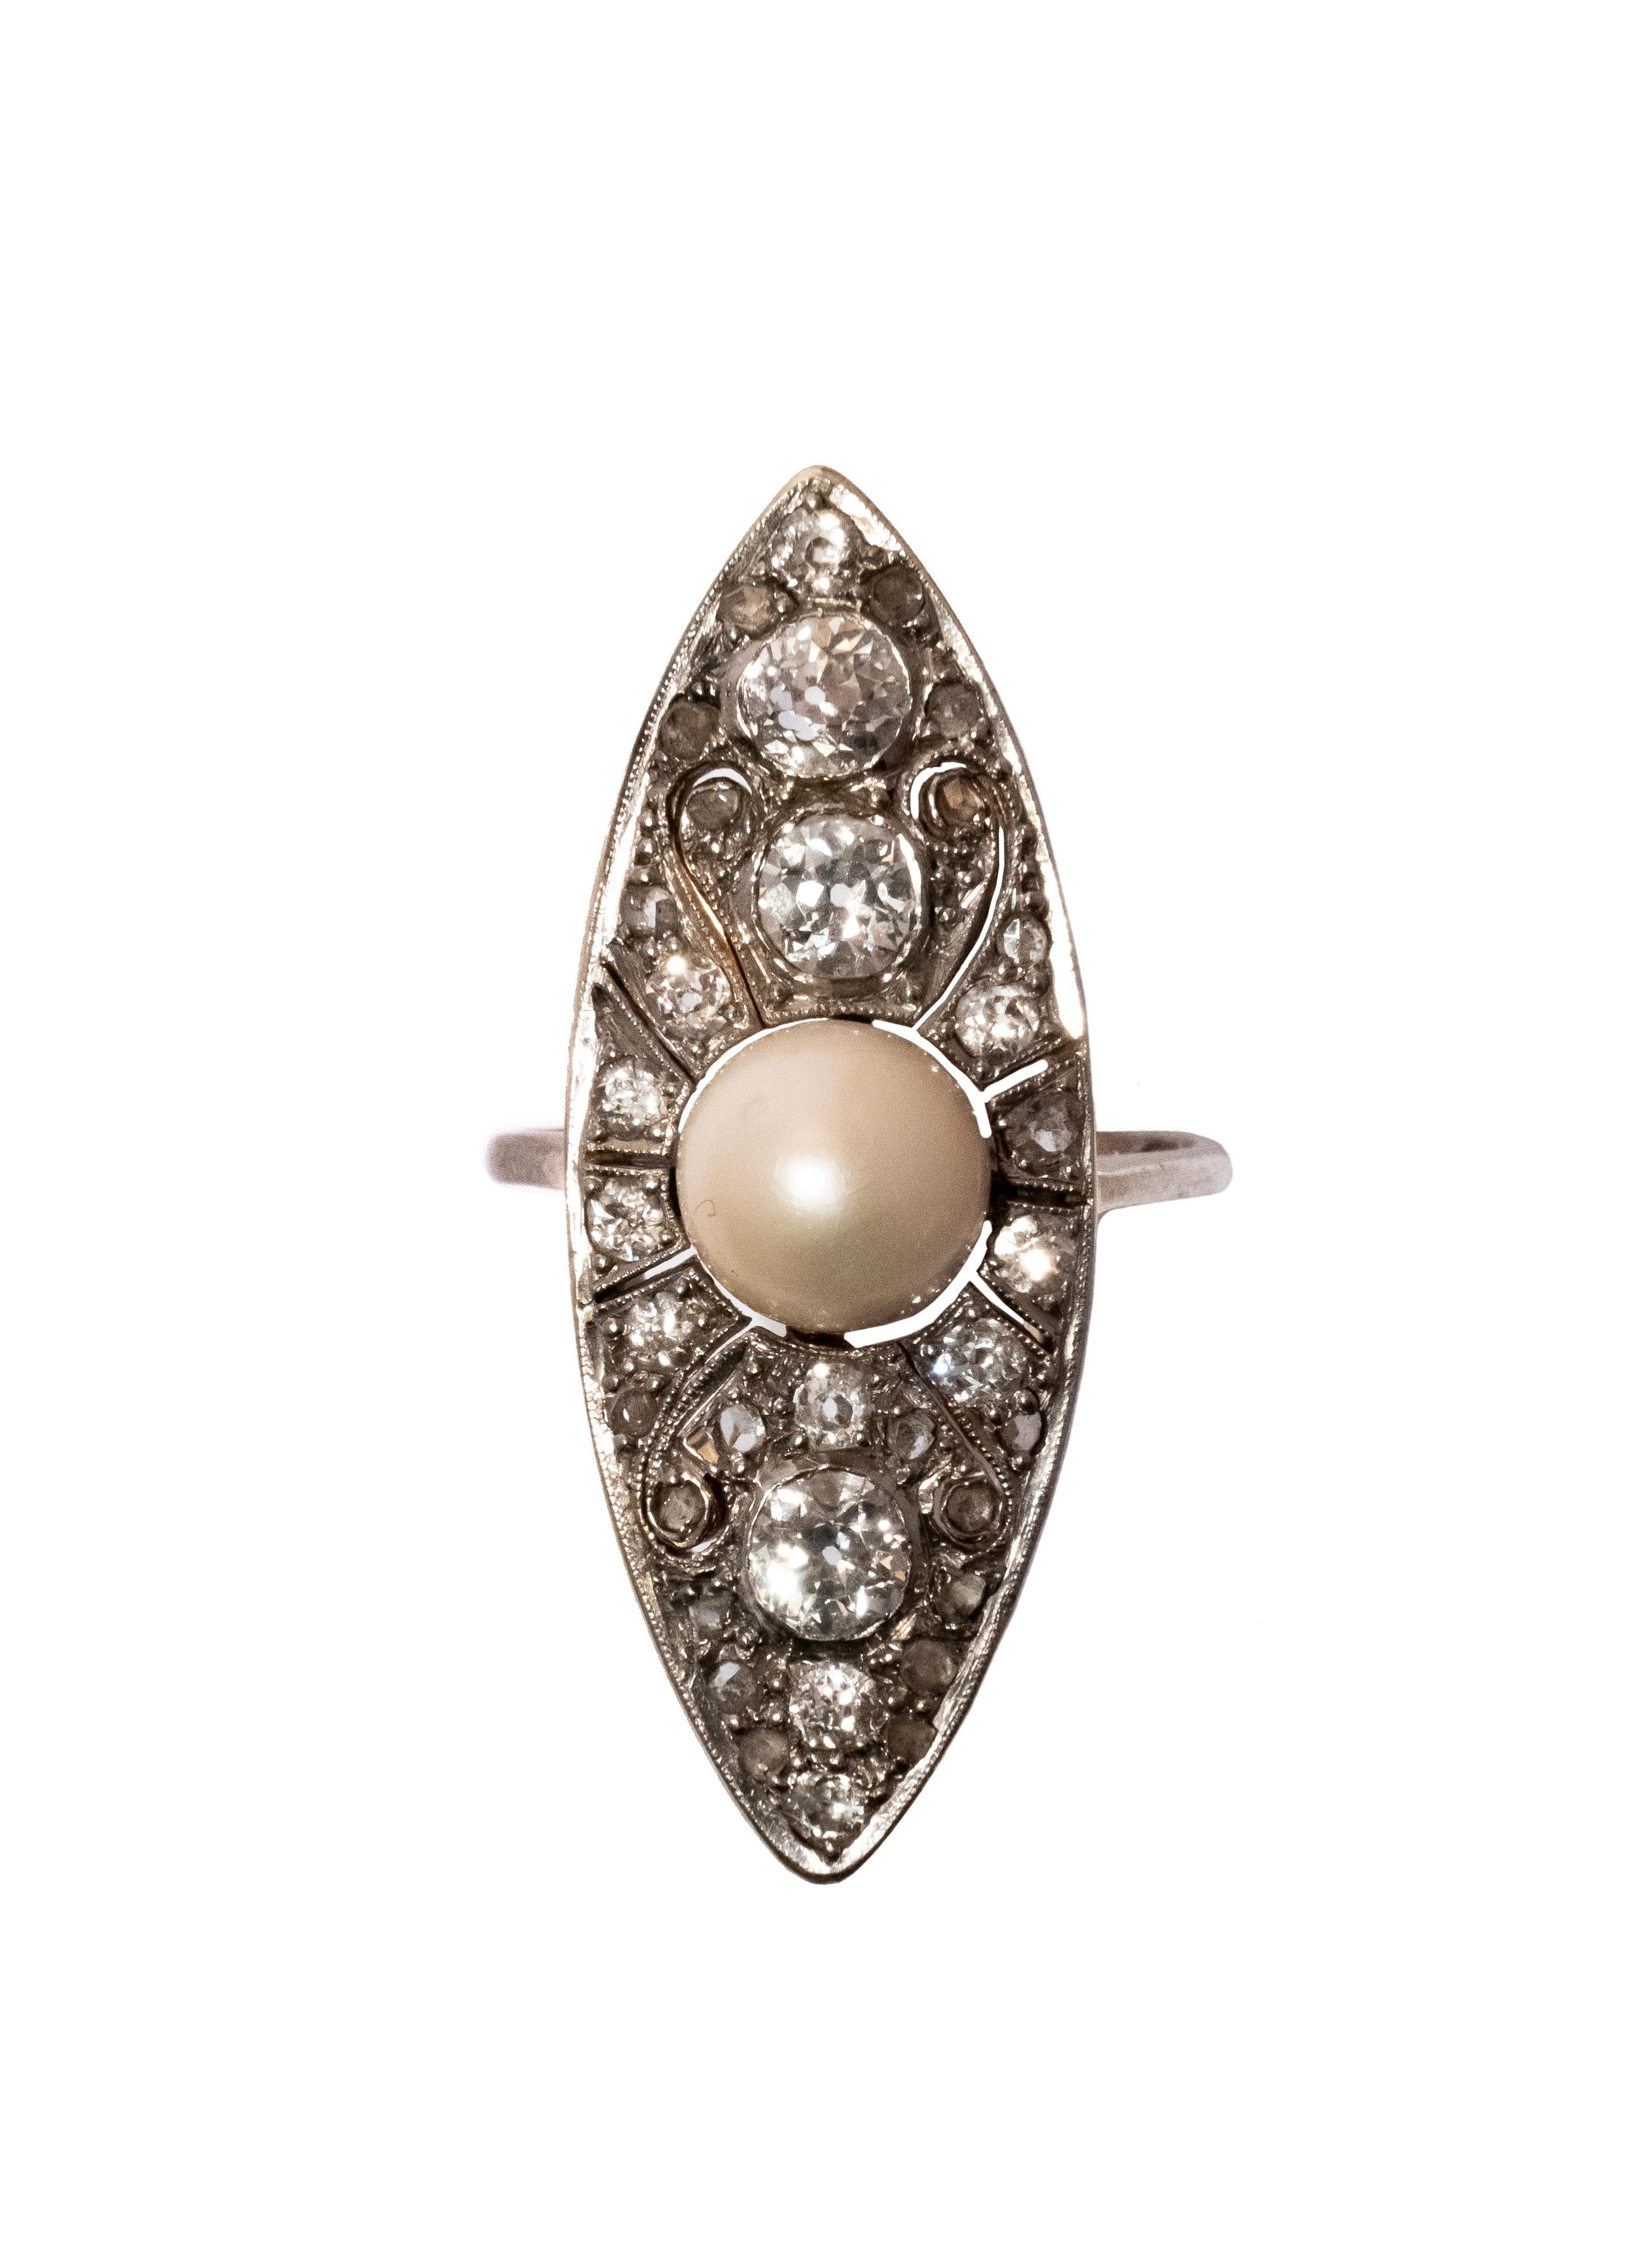 Embrace vintage glamour with this enchanting cocktail ring. Crafted in 18k white gold, it features a beautiful flood pearl center stone surrounded by 1.25 ct old cut diamonds.

This ring is a true testament to the craftsmanship of a bygone era,